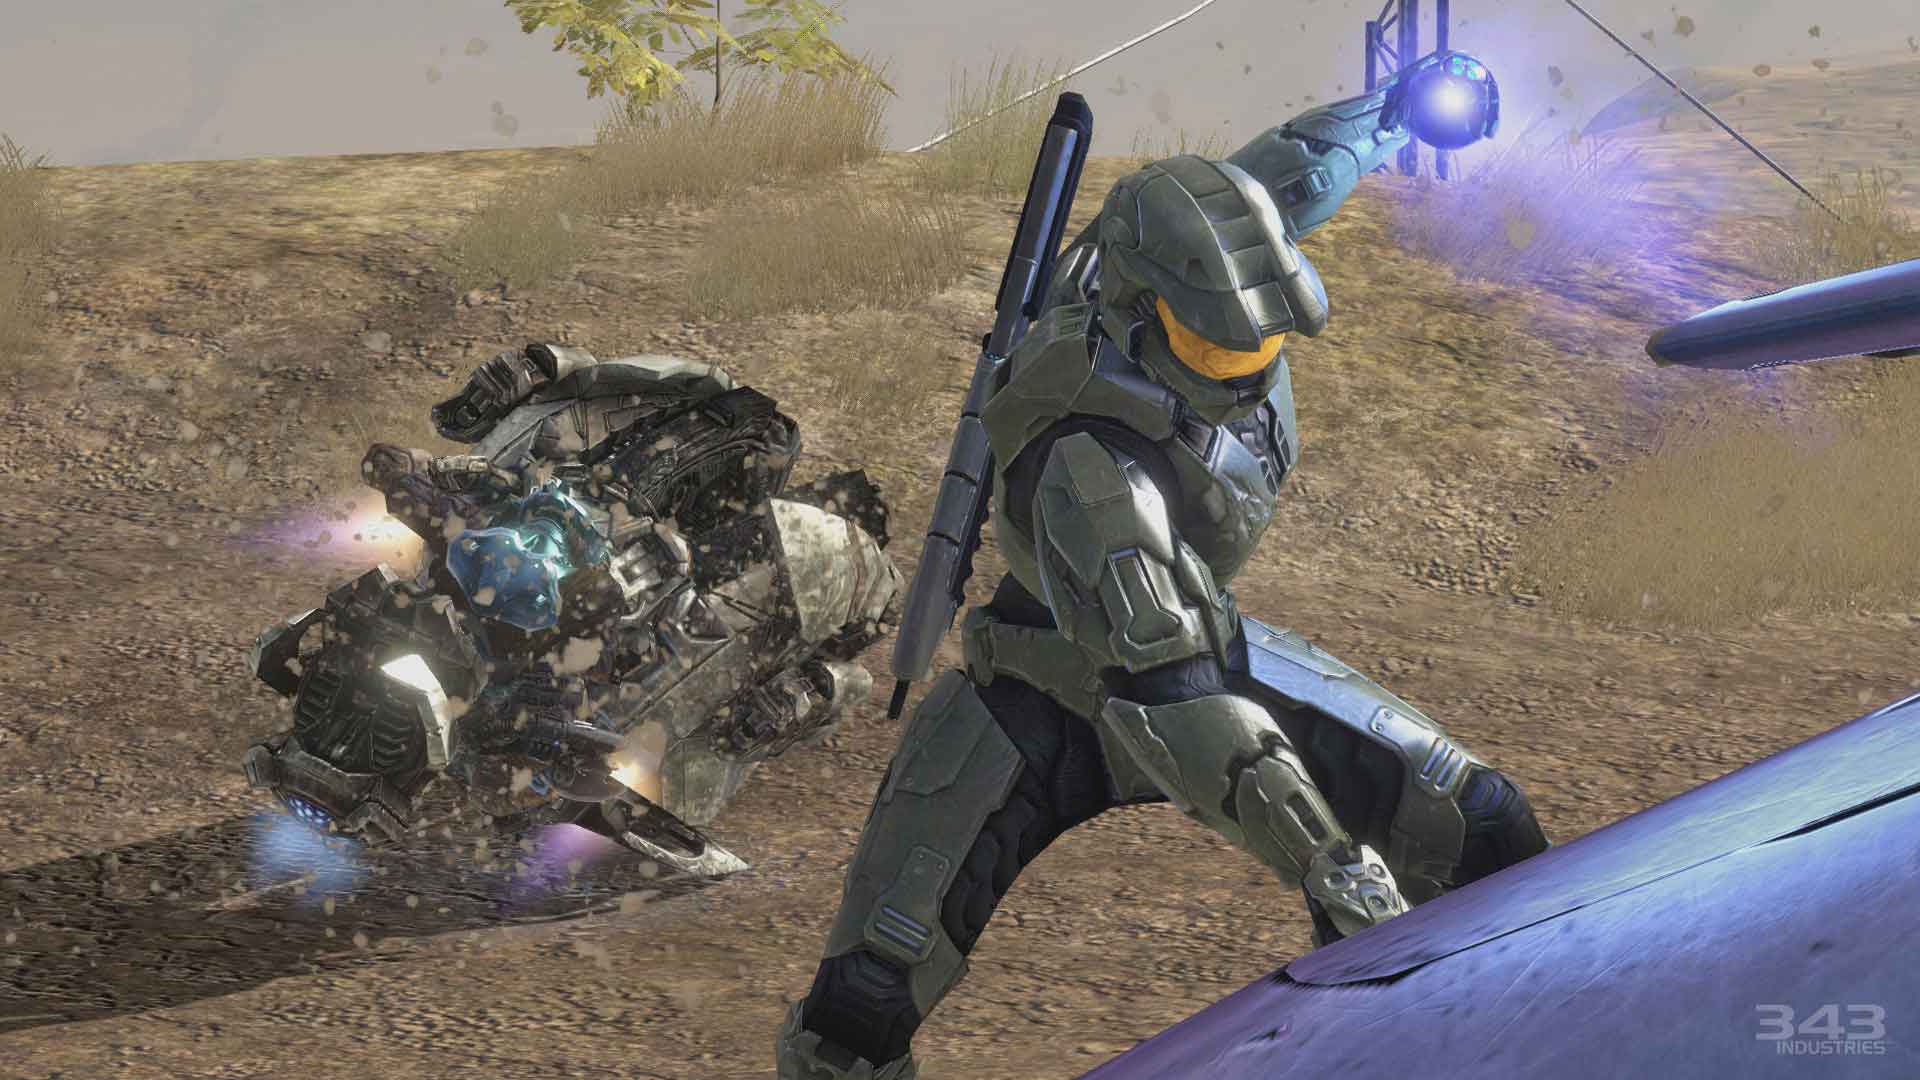 How fast do you move in halo 3?